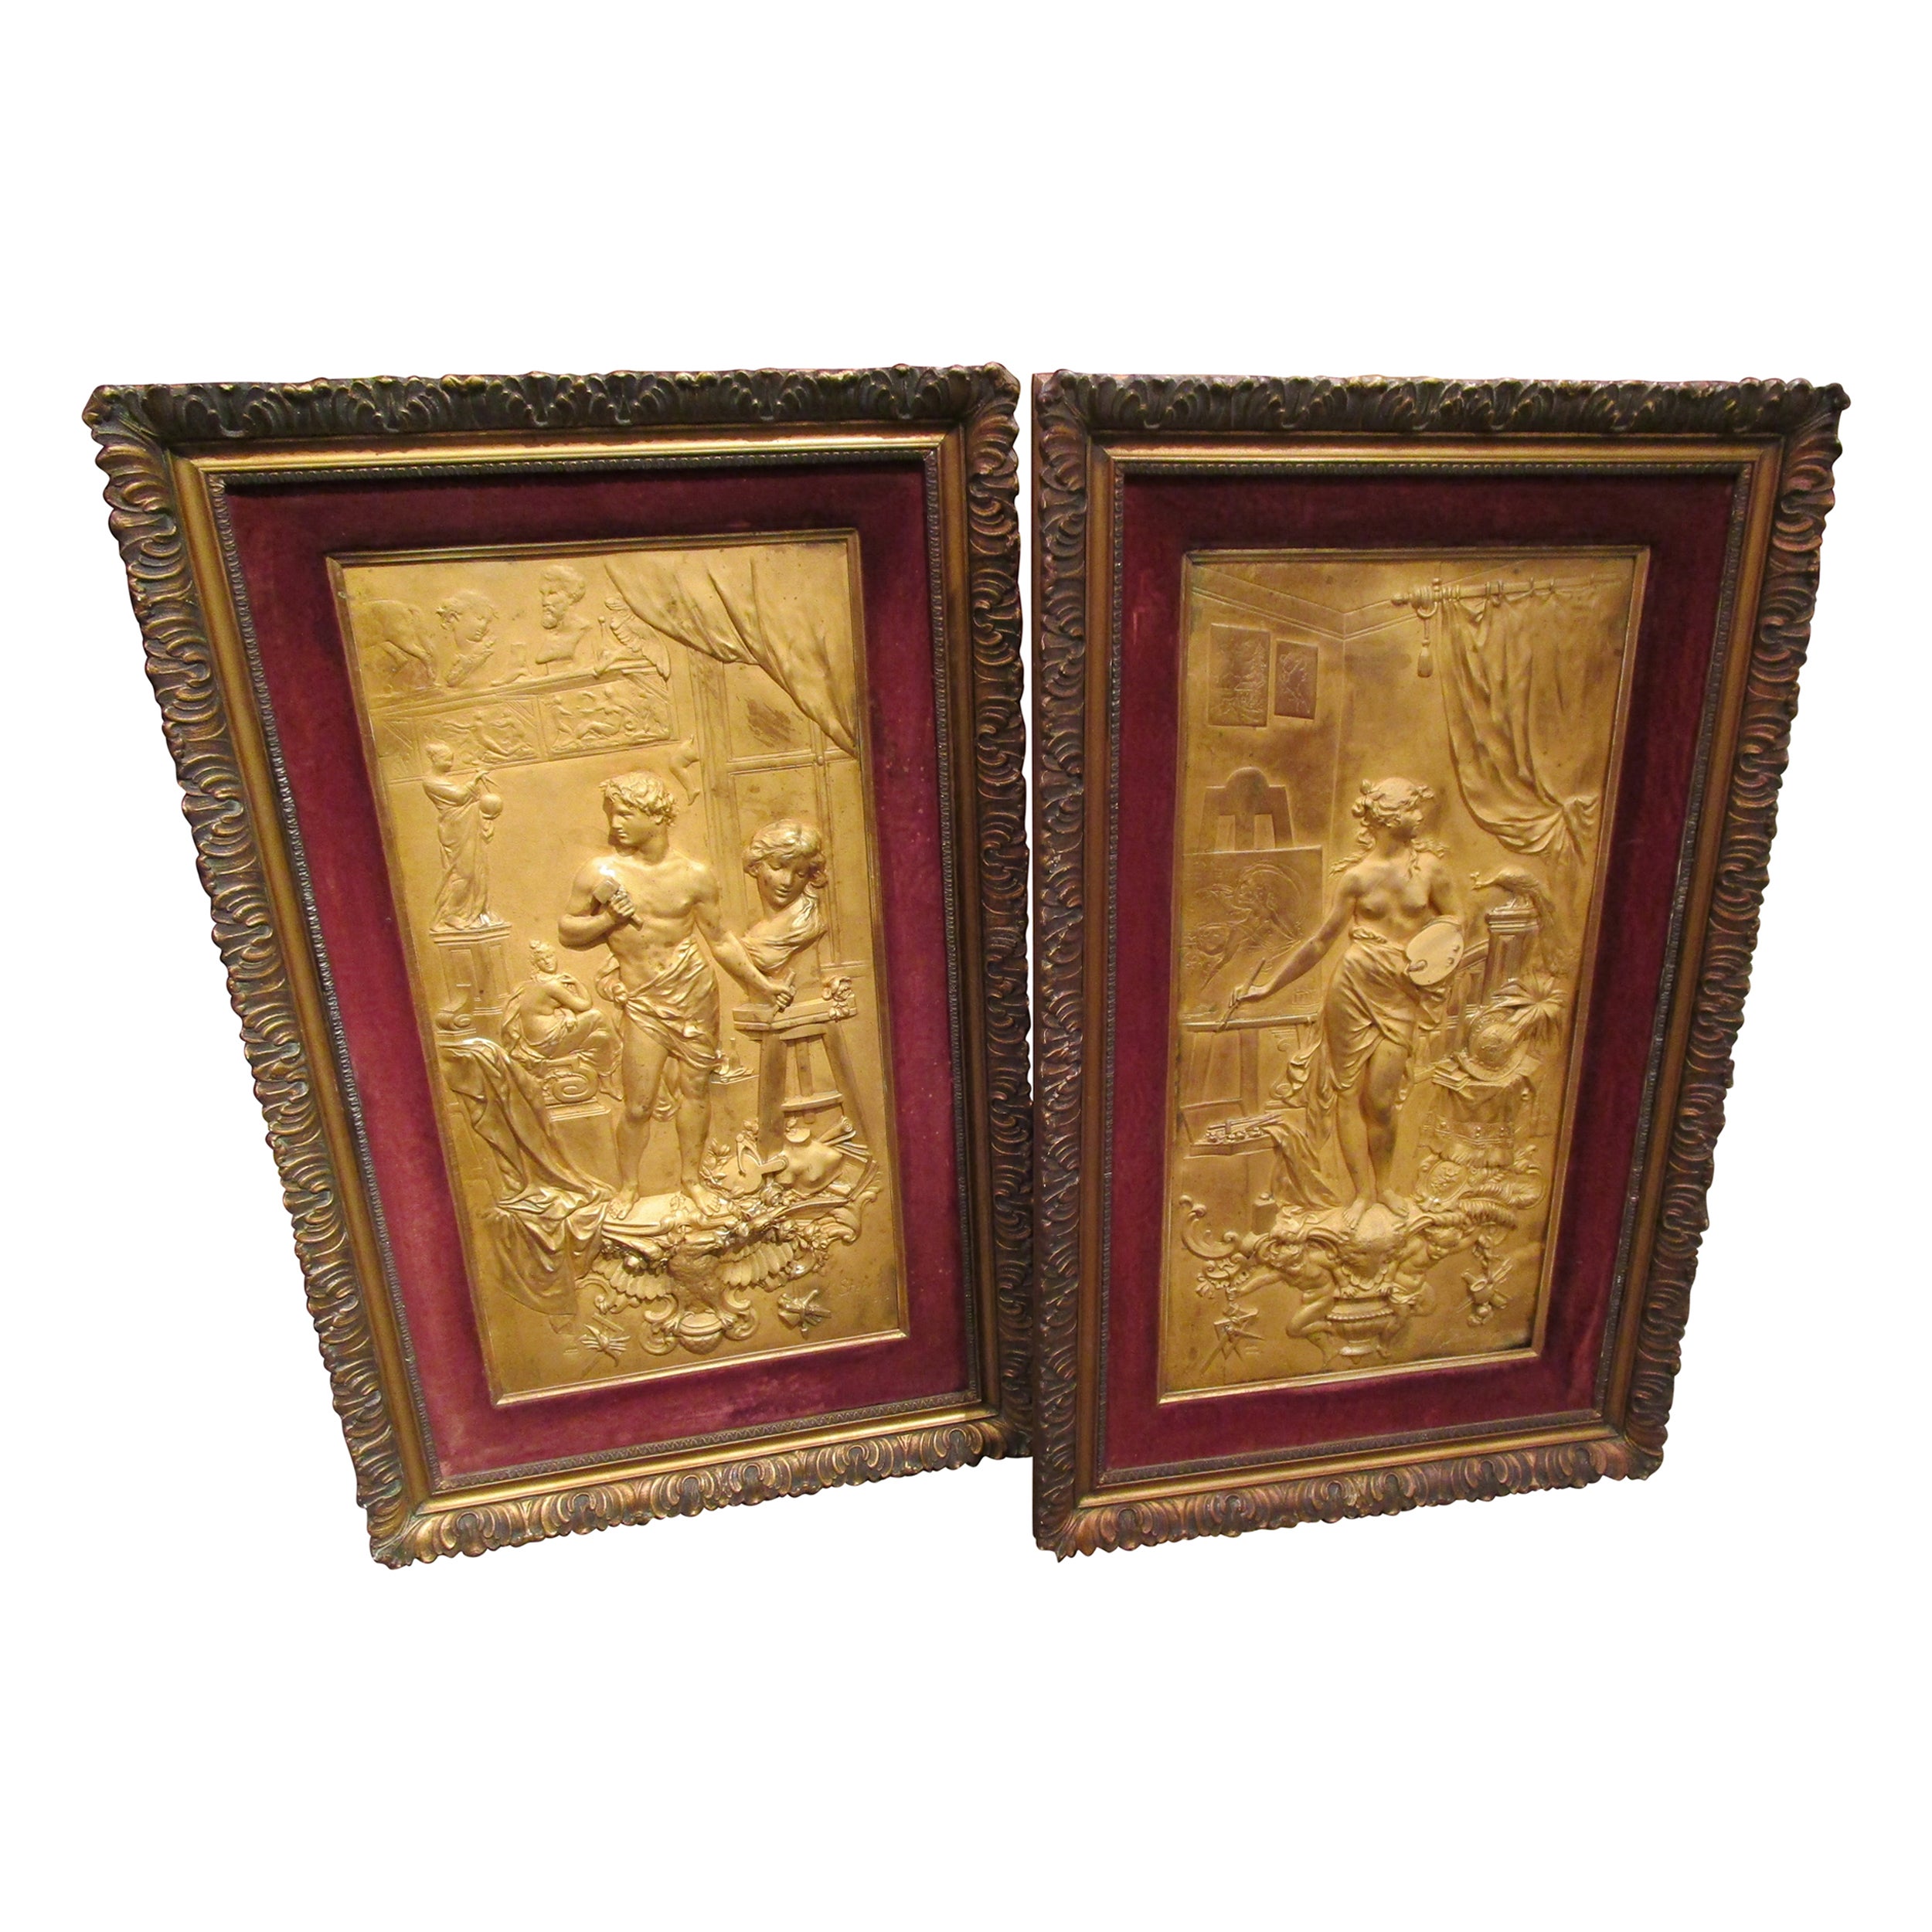 Fine Pair of 19th C Gilt Bronze Relief Plaques by Karl Sterrer 'Austrian 1844'